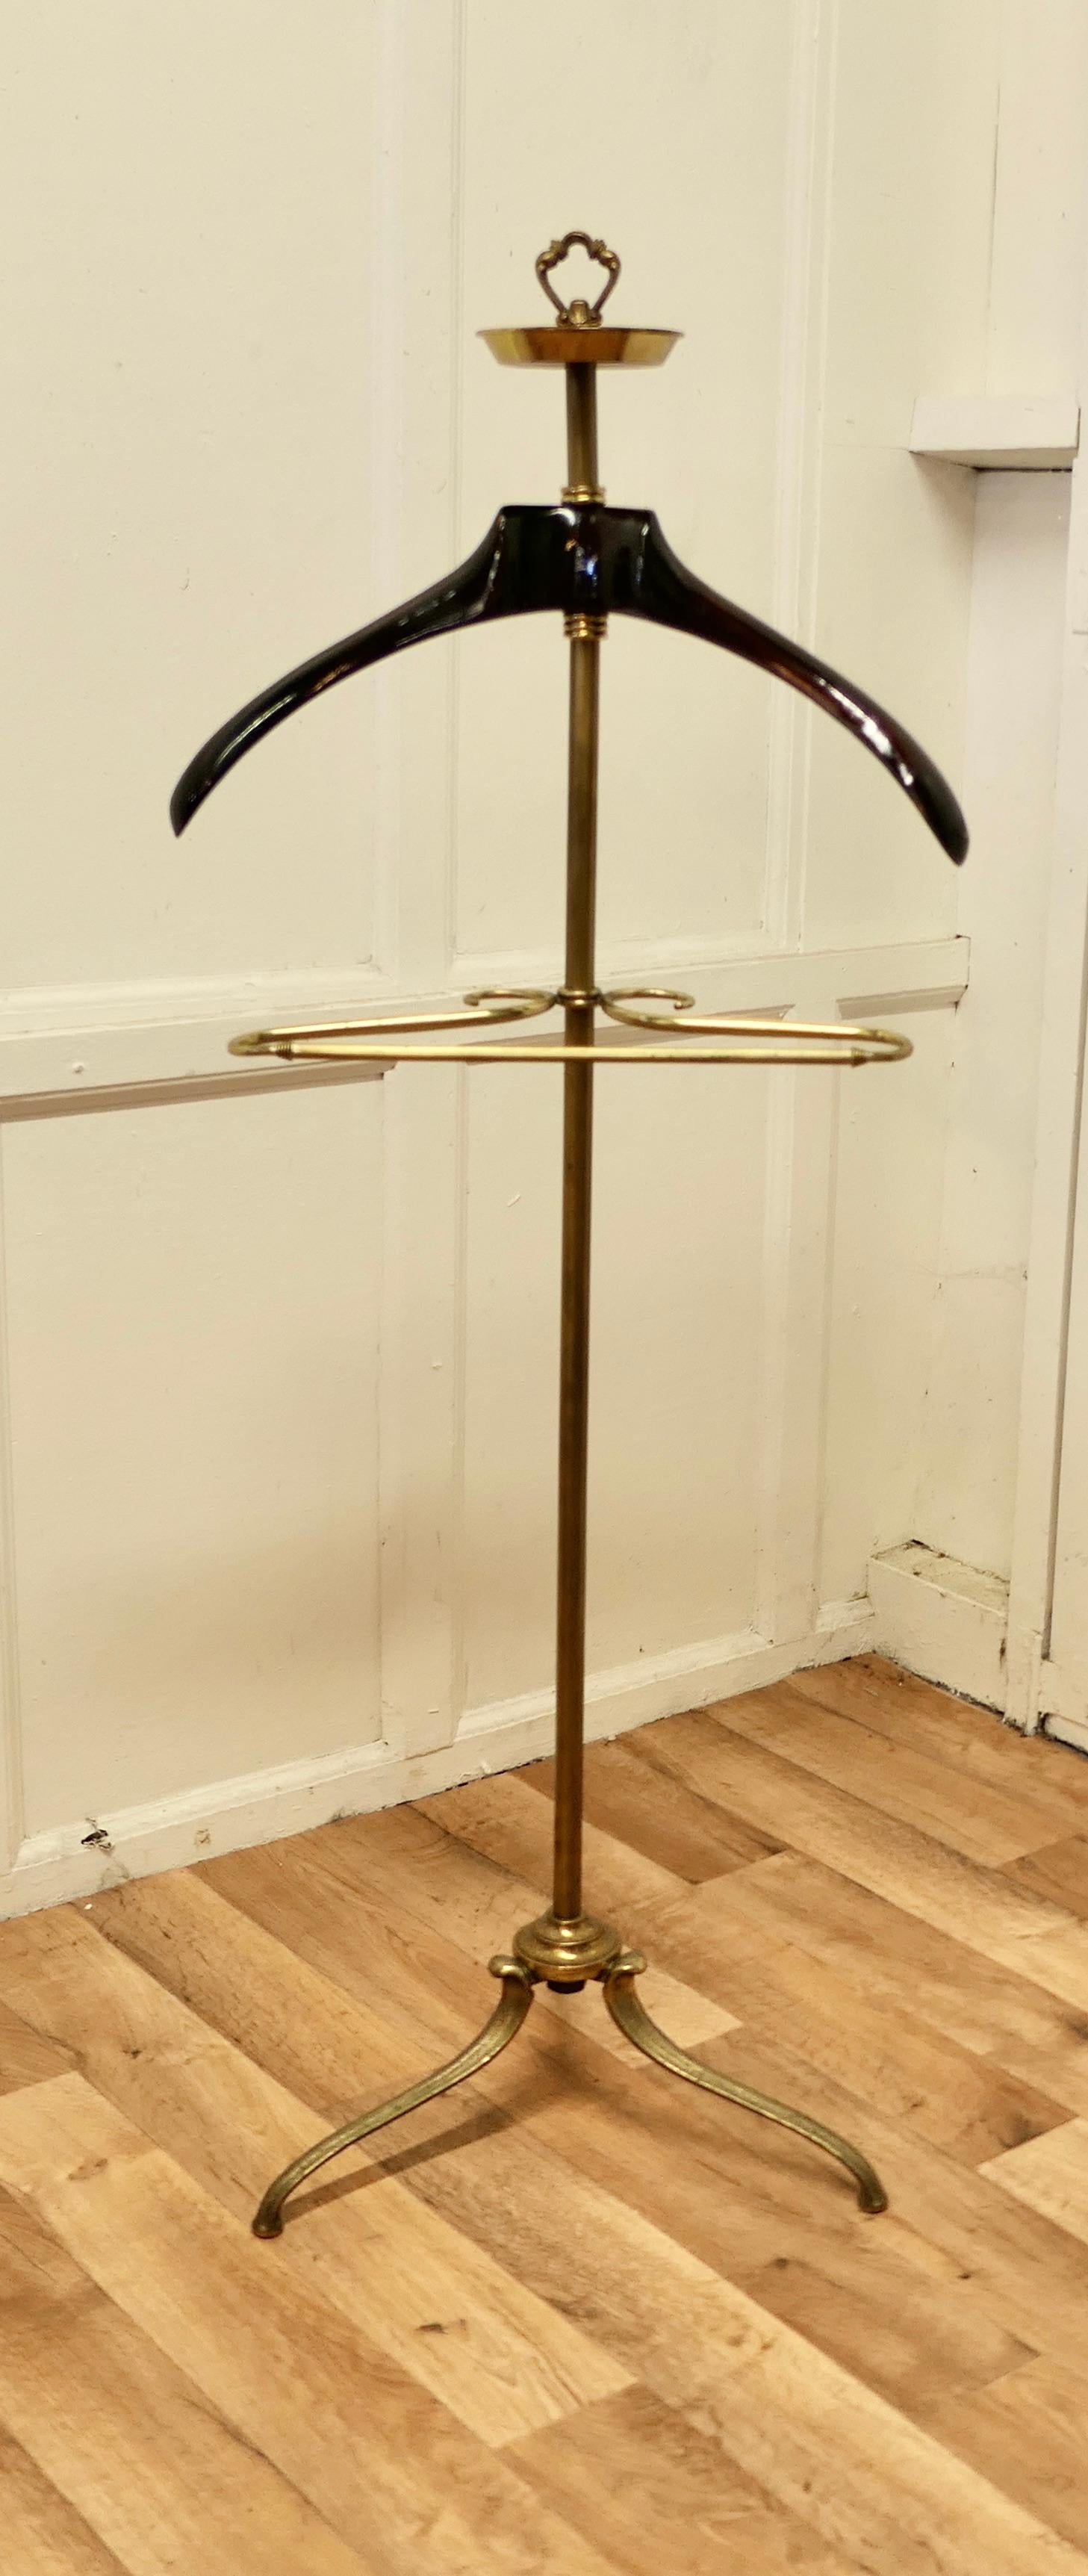 French Art Deco Gentleman’s floor standing brass suit hanger or dumb valet 


A very useful piece, the hanger or clothes stand is in brass and has a 3 footed base, it has a small circular tray at the top for cufflinks etc. and a central brass rail